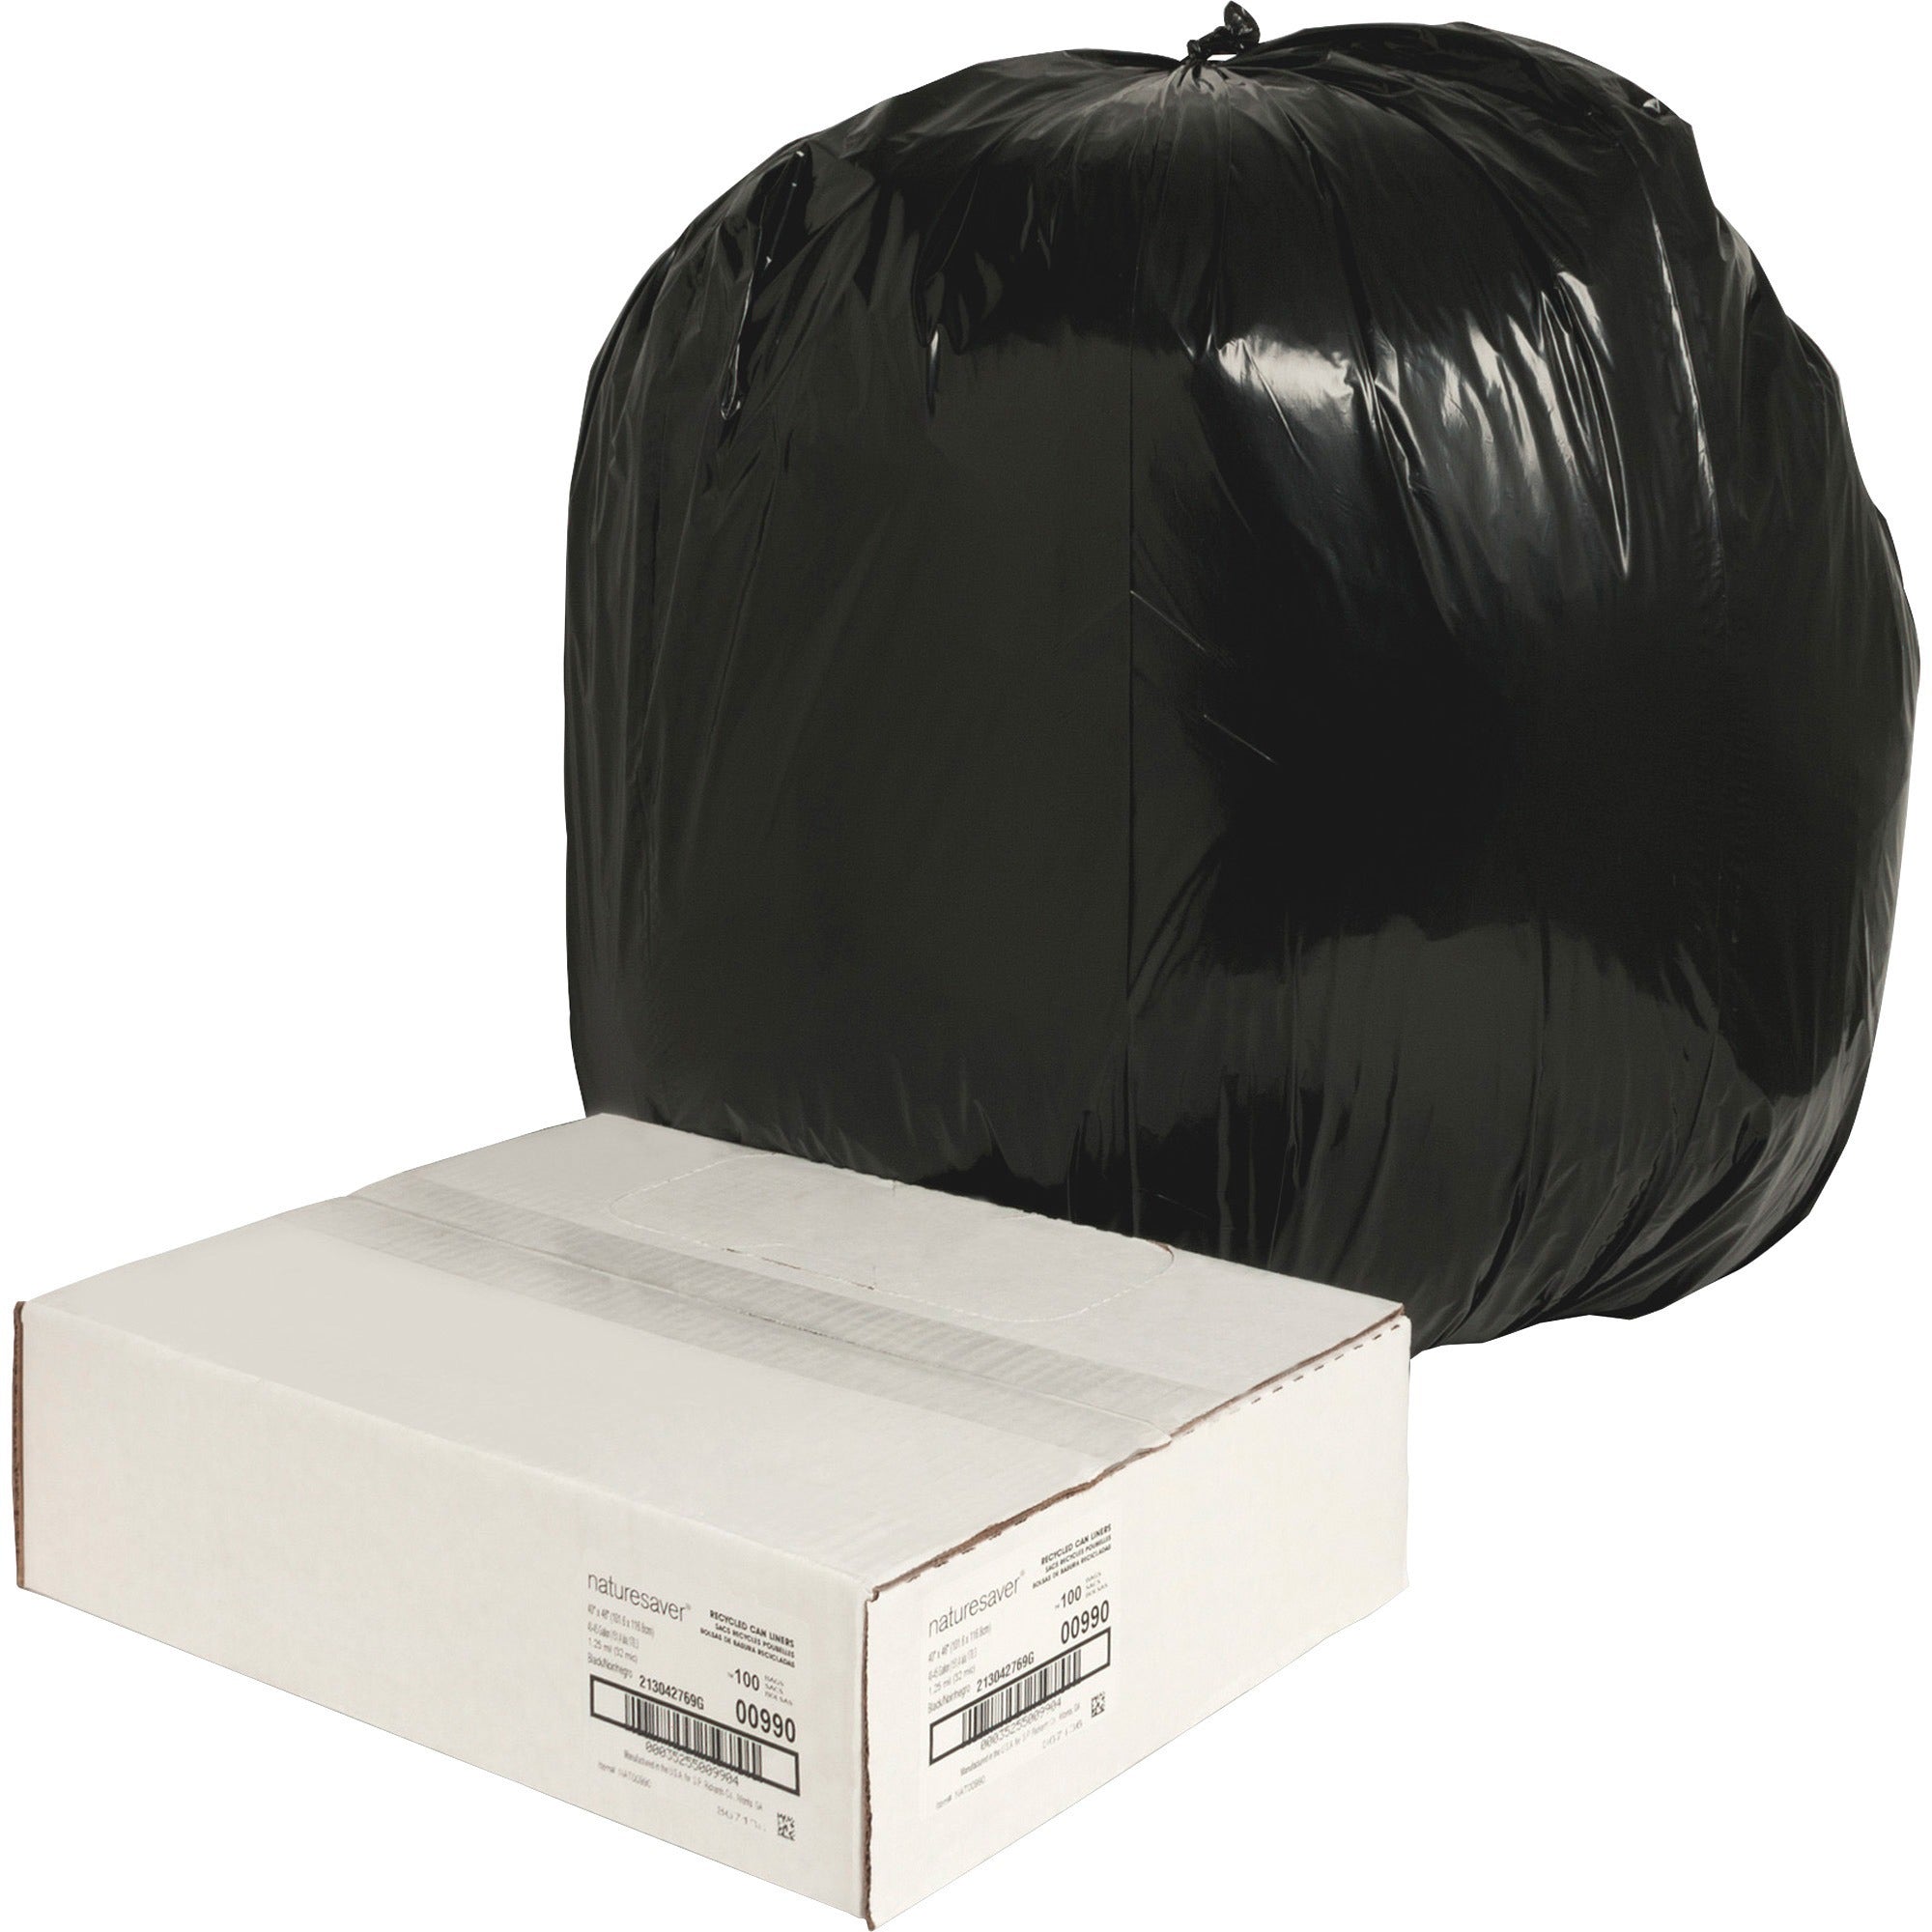 Nature Saver Black Low-density Recycled Can Liners - Large Size - 45 gal Capacity - 40" Width x 46" Length - 1.25 mil (32 Micron) Thickness - Low Density - Black - Plastic - 100/Carton - Cleaning Supplies - Recycled - 